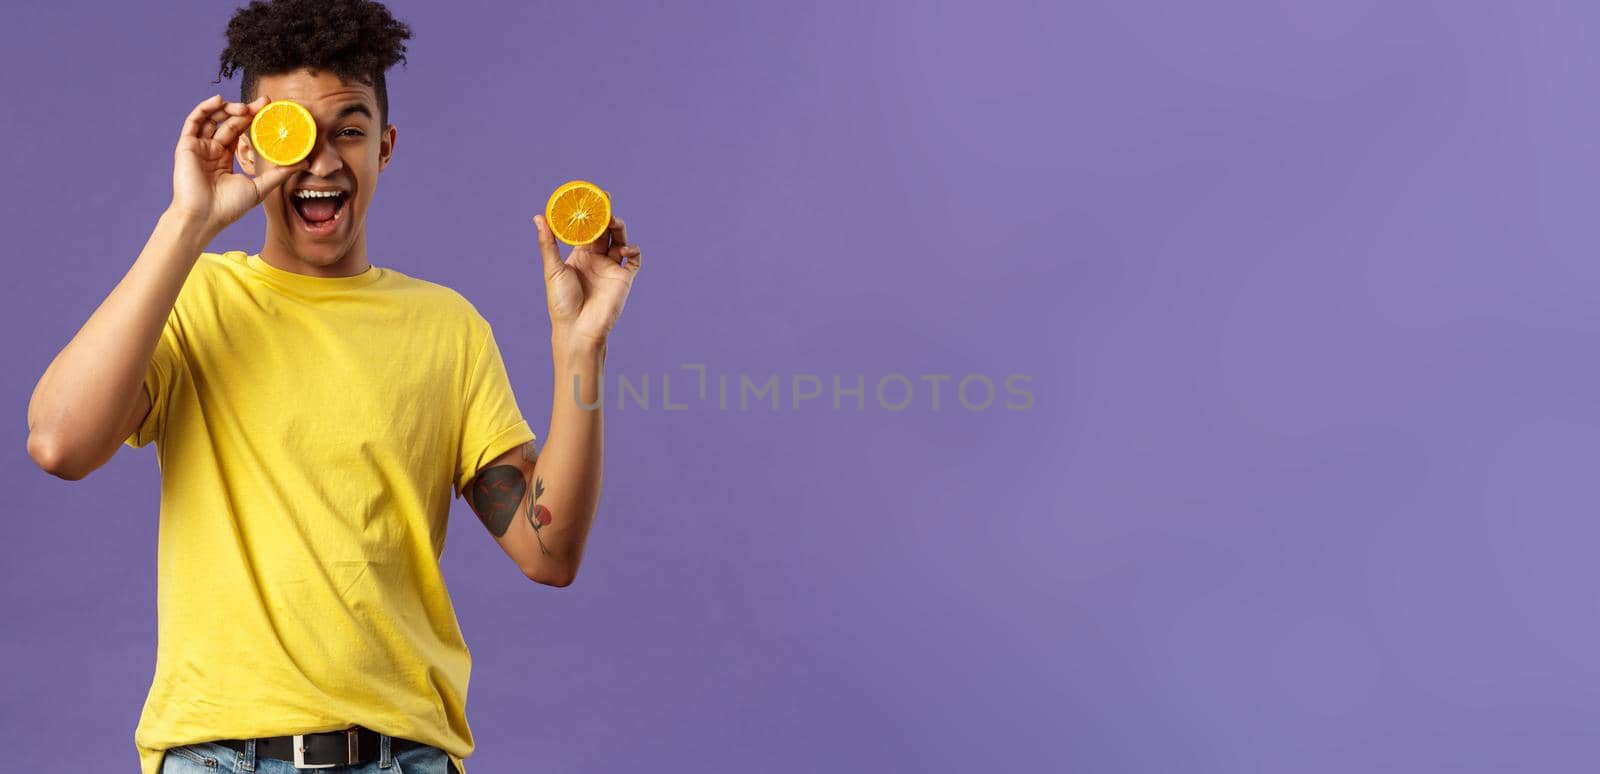 Holidays, vitamins and vacation concept. Portrait of carefree, upbeat good-looking man having fun, look playful laughing, likes eating fruits healthy food, holding pieces of oranges by Benzoix